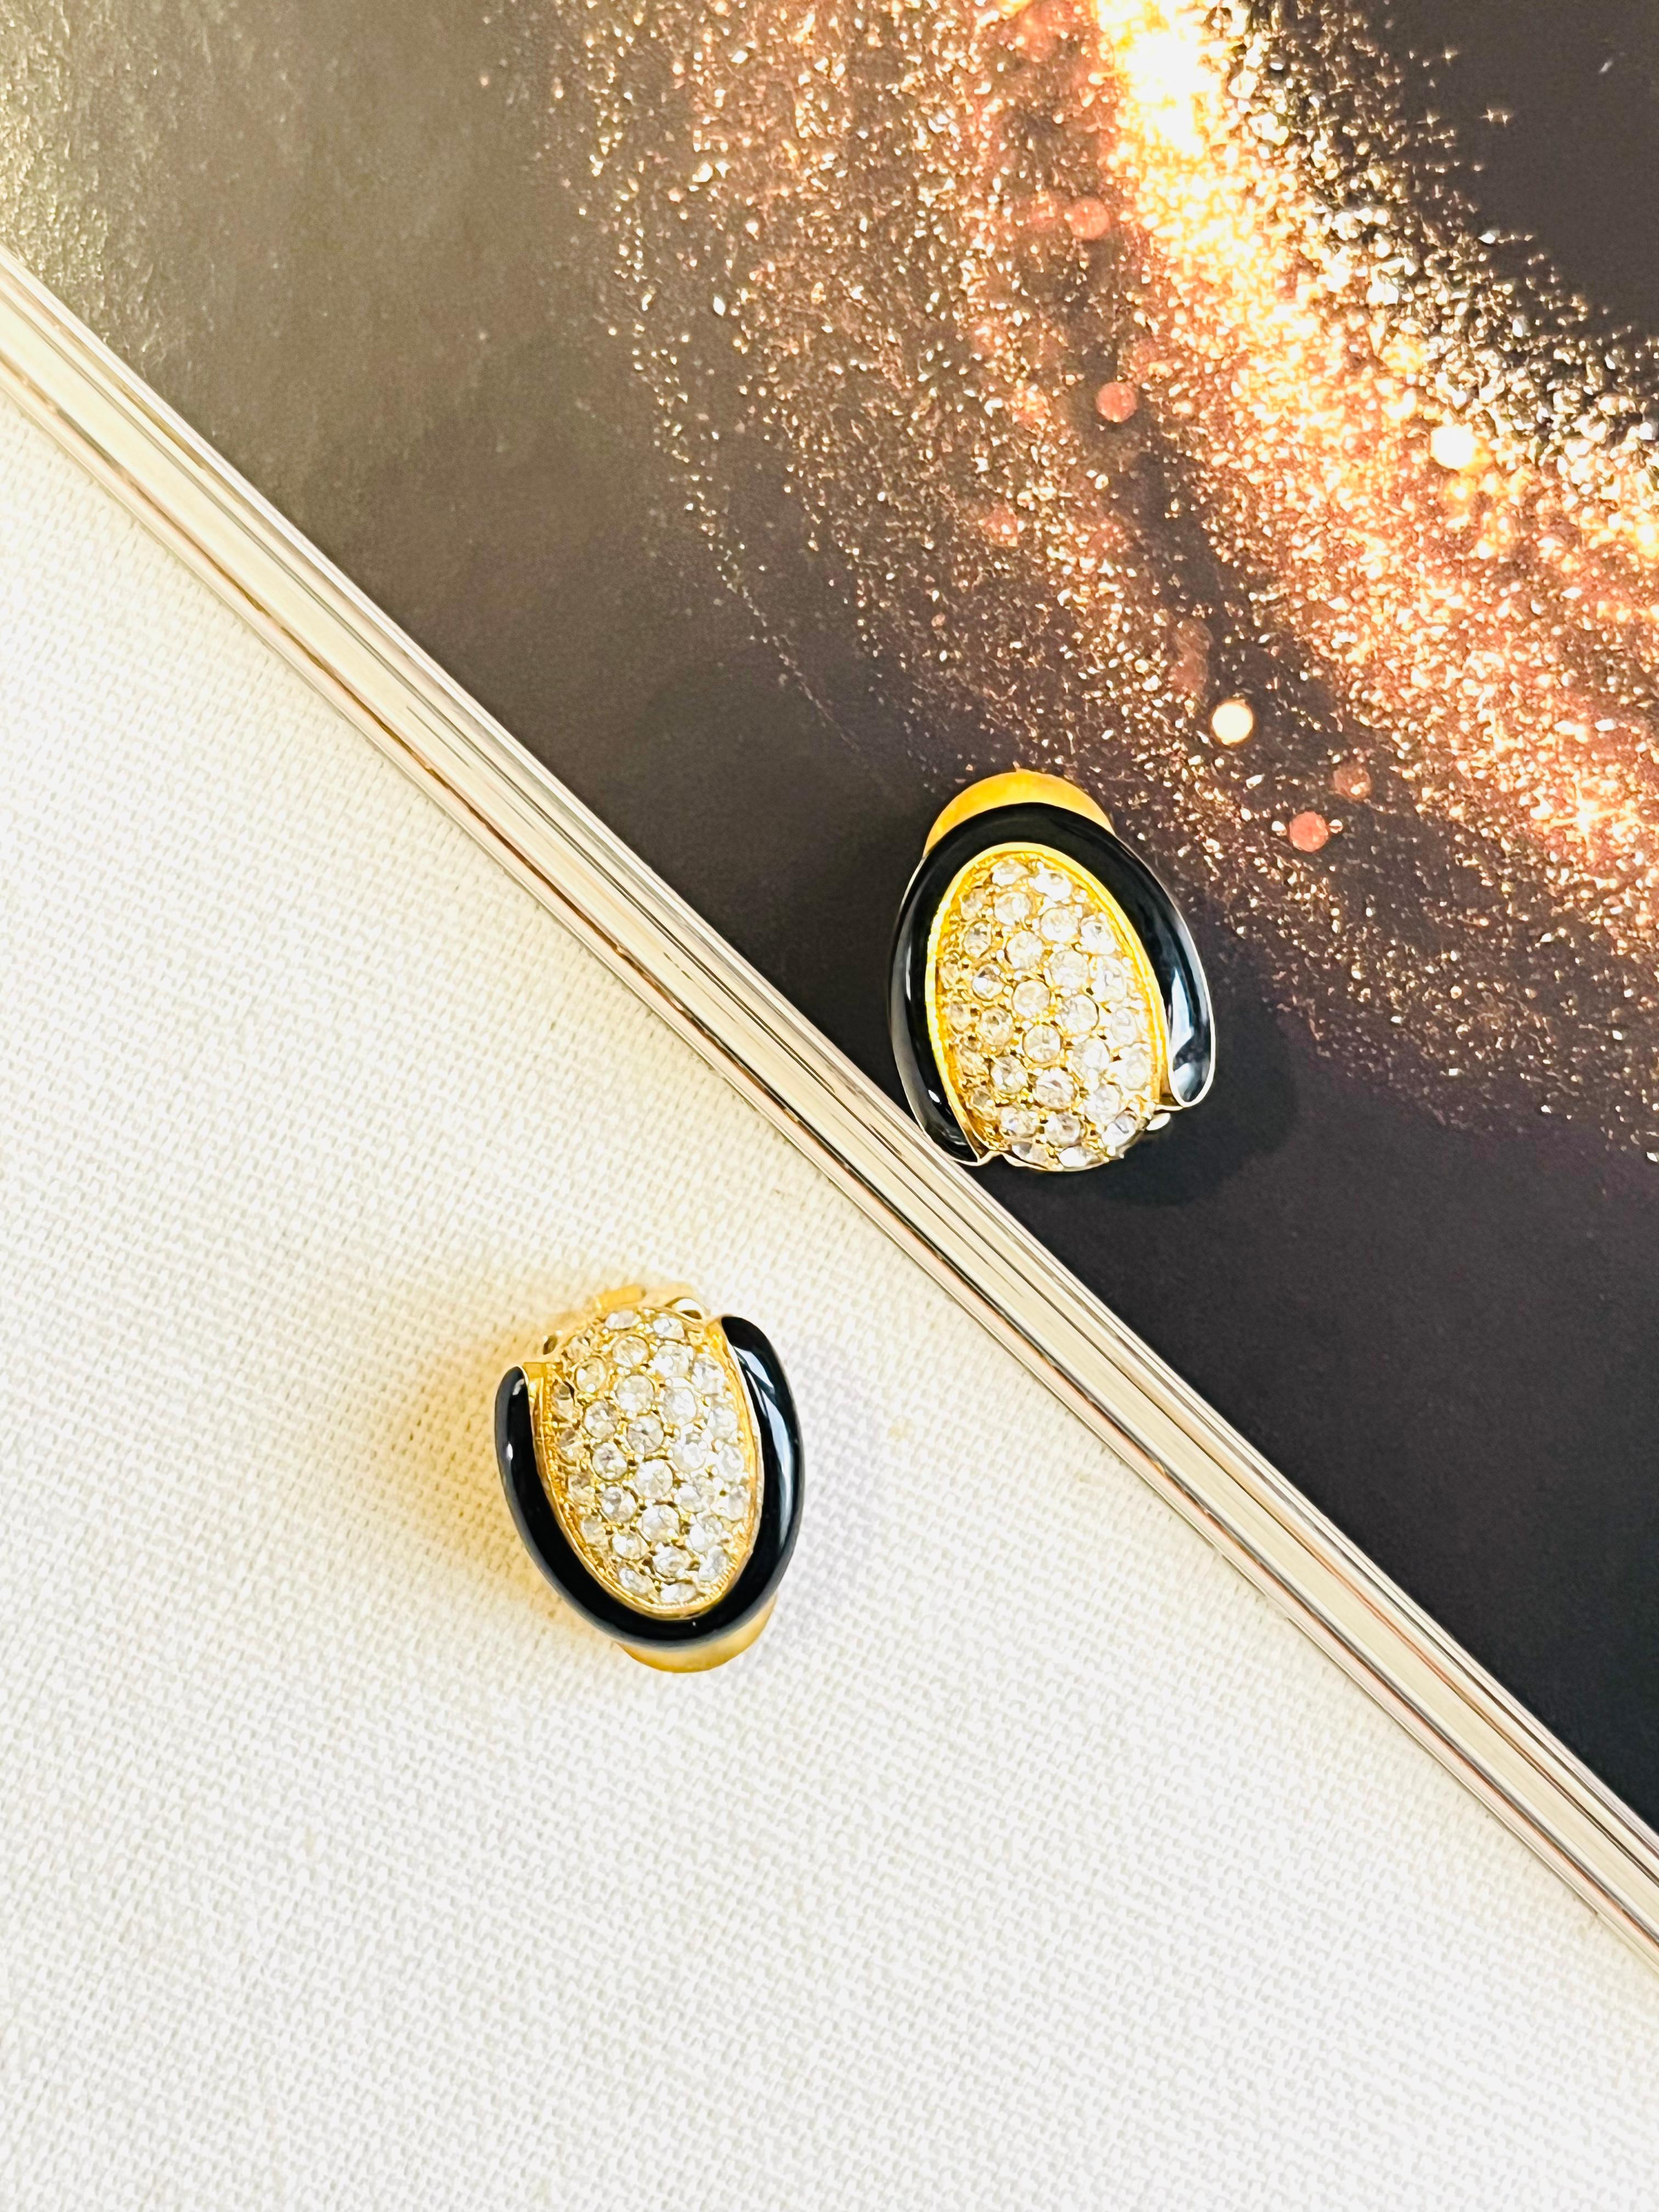 Excellent condition. Very new. 100% genuine.

A very beautiful pair of clip on earrings by Chr. DIOR, signed at the back.

Size: 1.8*1.5 cm.

Weight: 6.0 g/each.
_ _ _

Great for everyday wear. Come with velvet pouch and beautiful package.

Makes